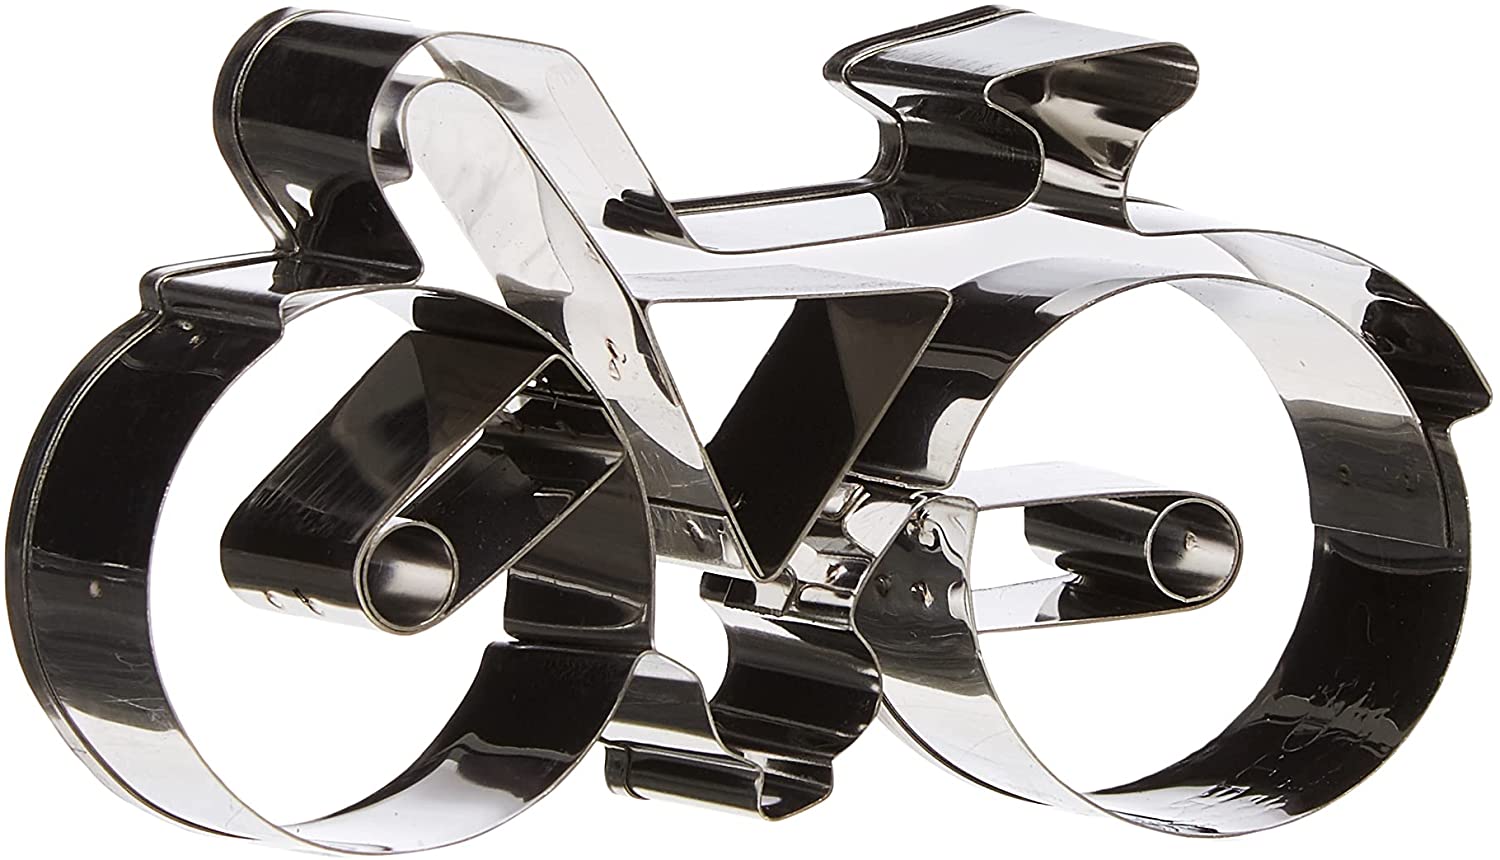 Staedter Städter Stainless Steel Bicycle Cookie Cutter 9 x 30 x 30 cm